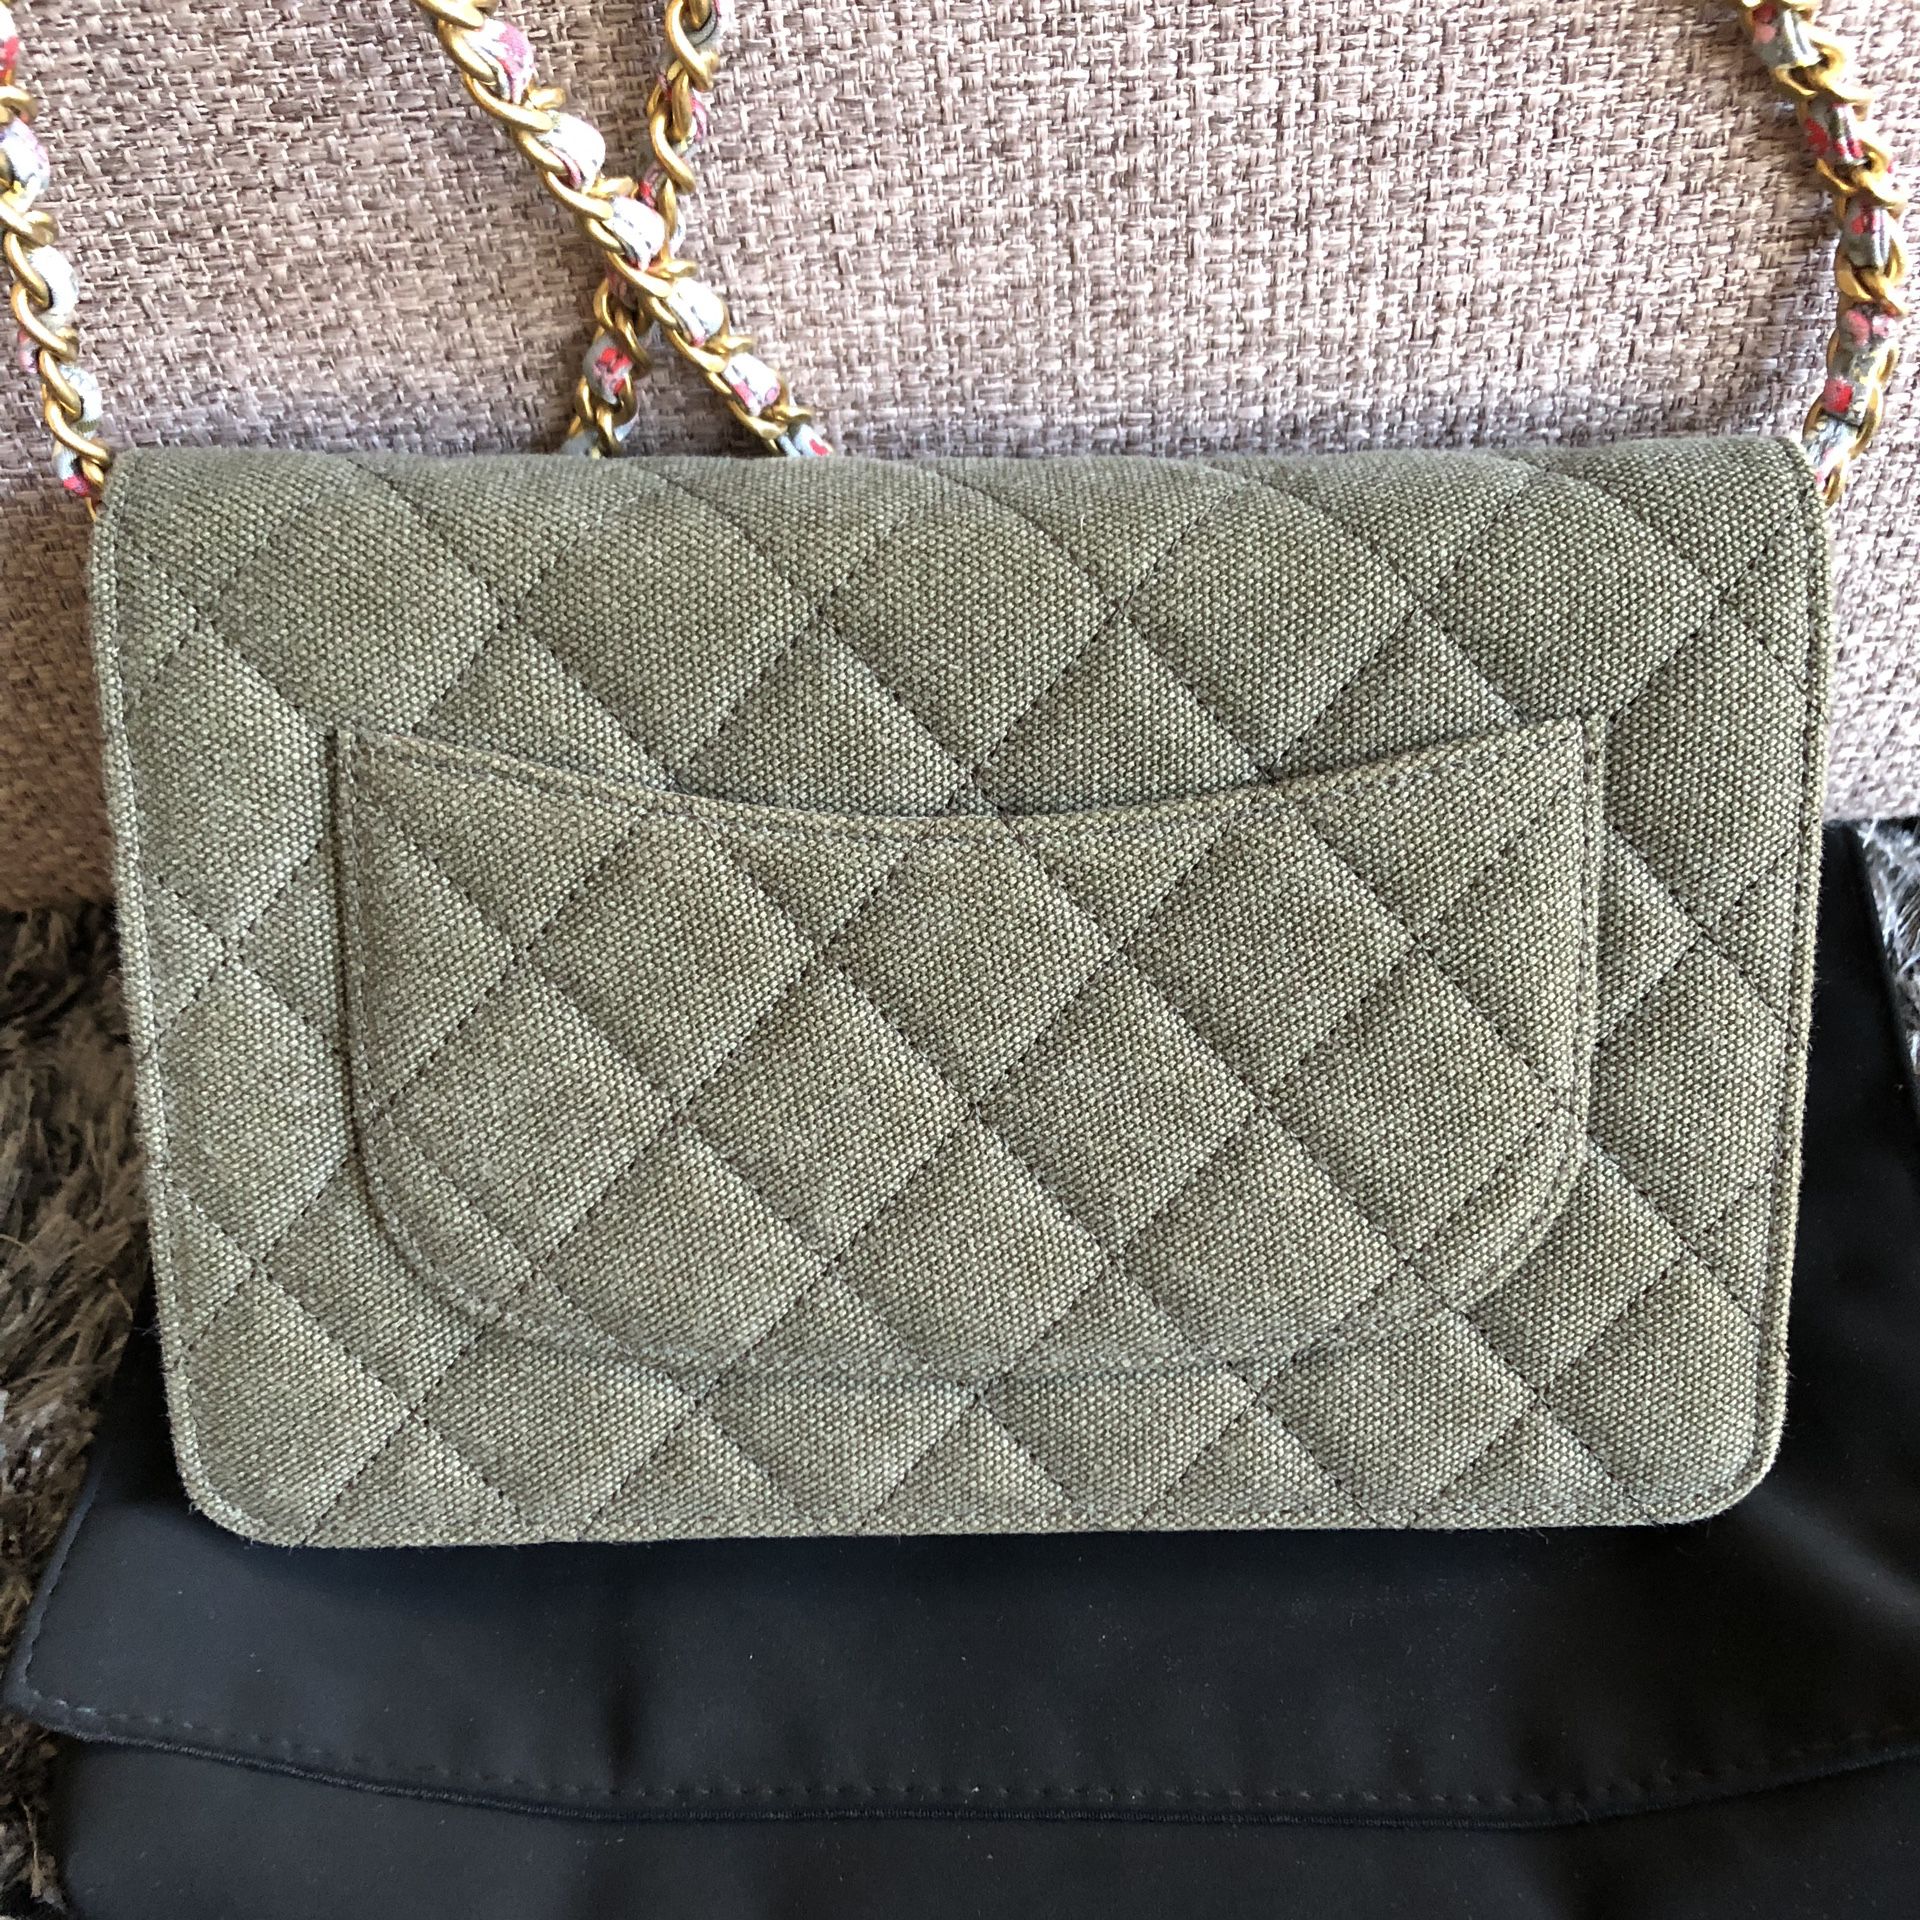 Chanel bag for Sale in Snohomish, WA - OfferUp